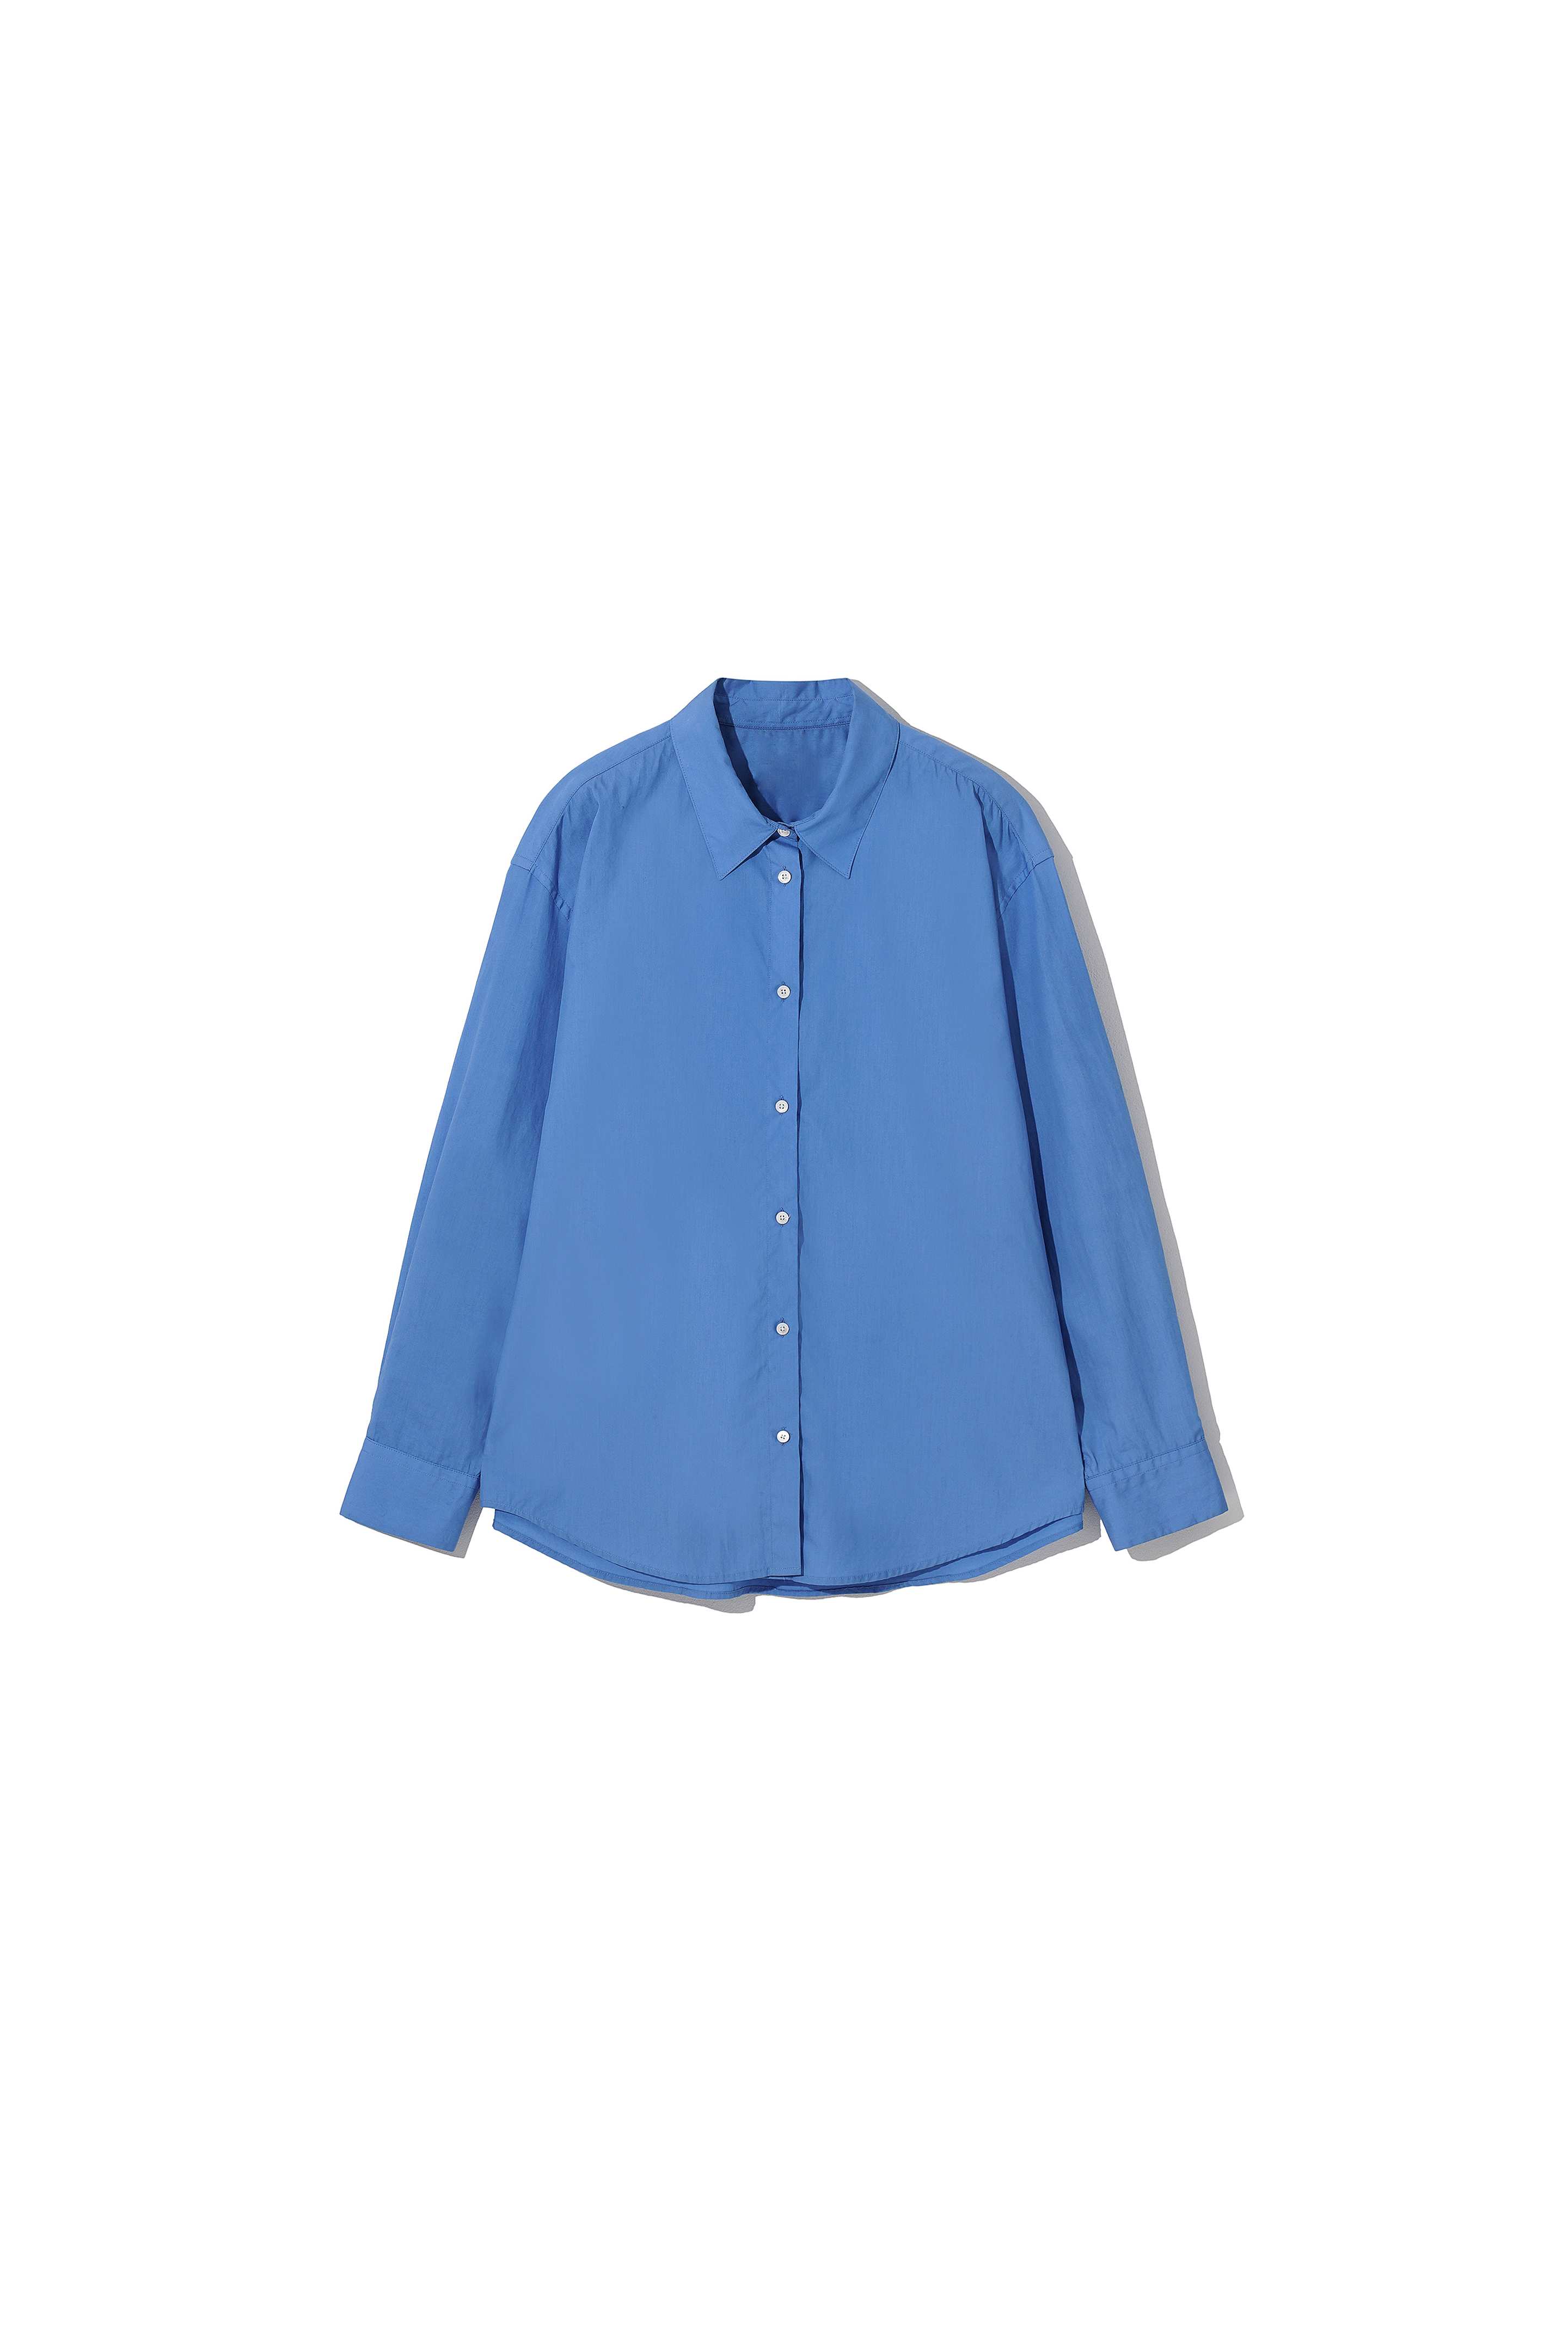 2nd) 60&#039; Cotton Shirts Over-sized Blue [12.12(TUE) 20:00]